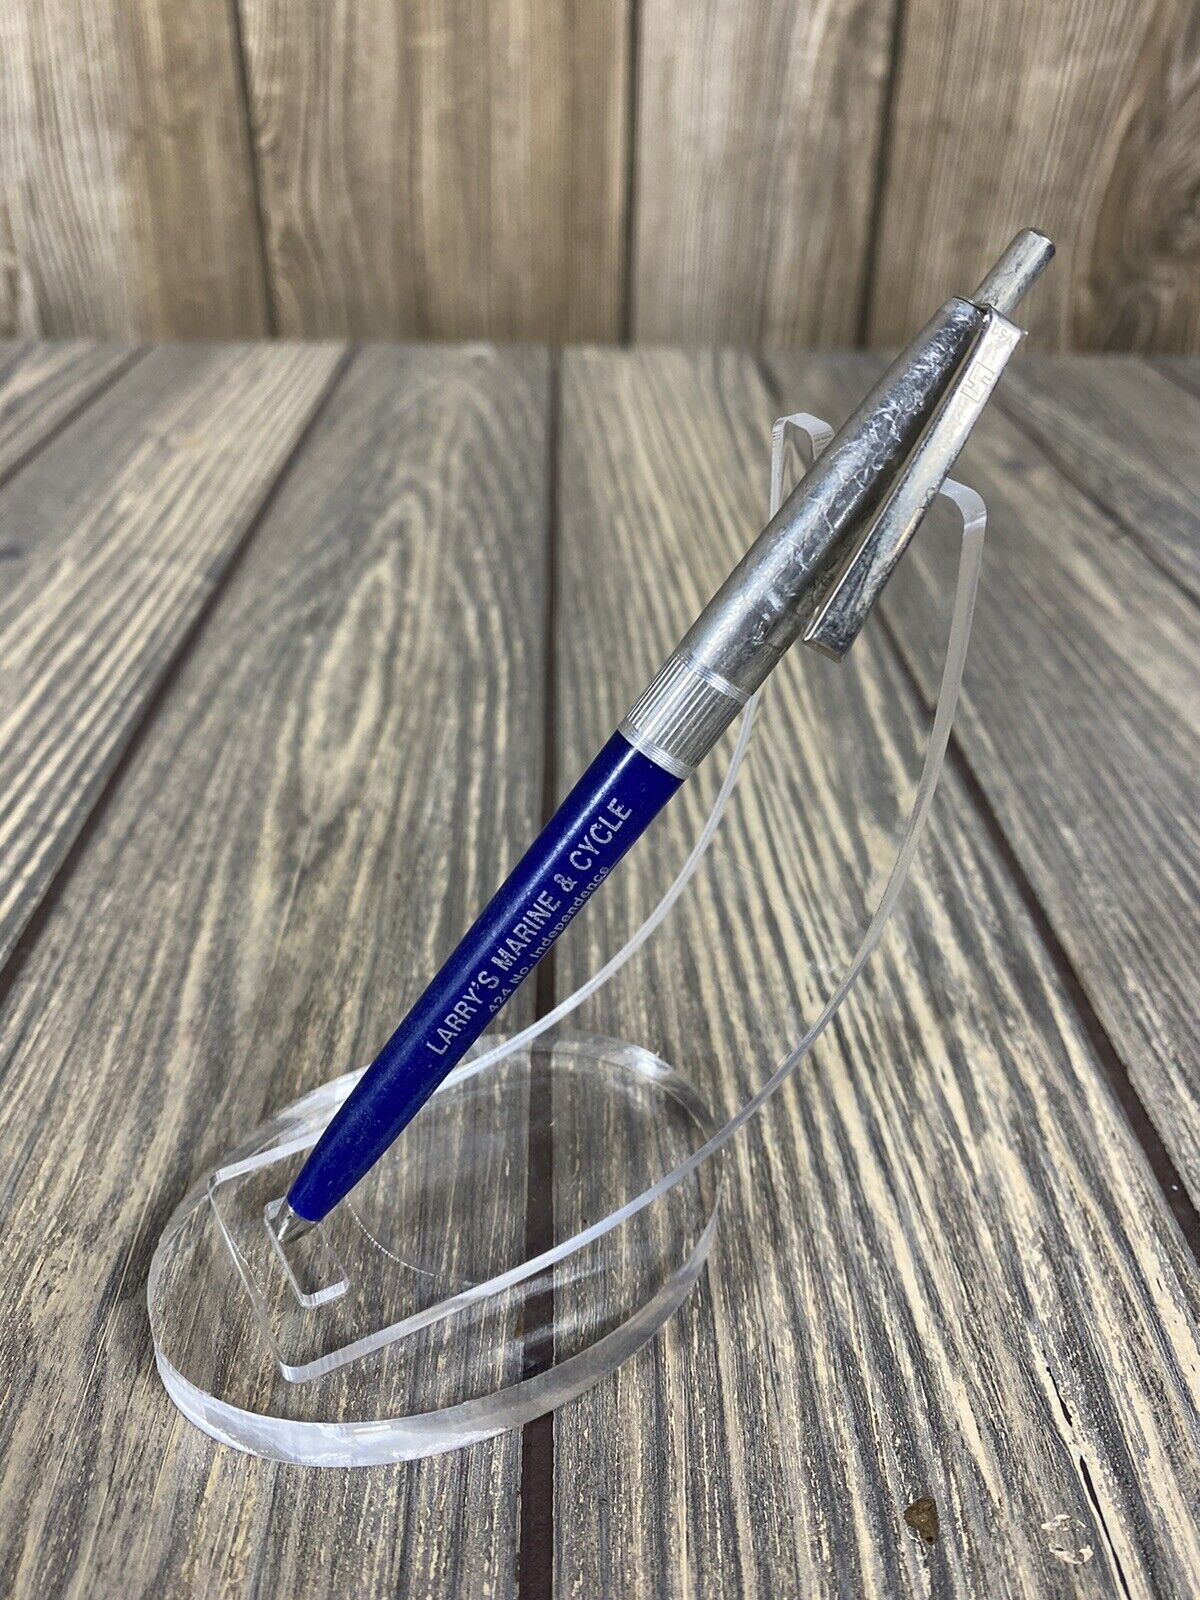 Vintage Larry’s Marine and Cycle Blue Retractable Pen Advertisement